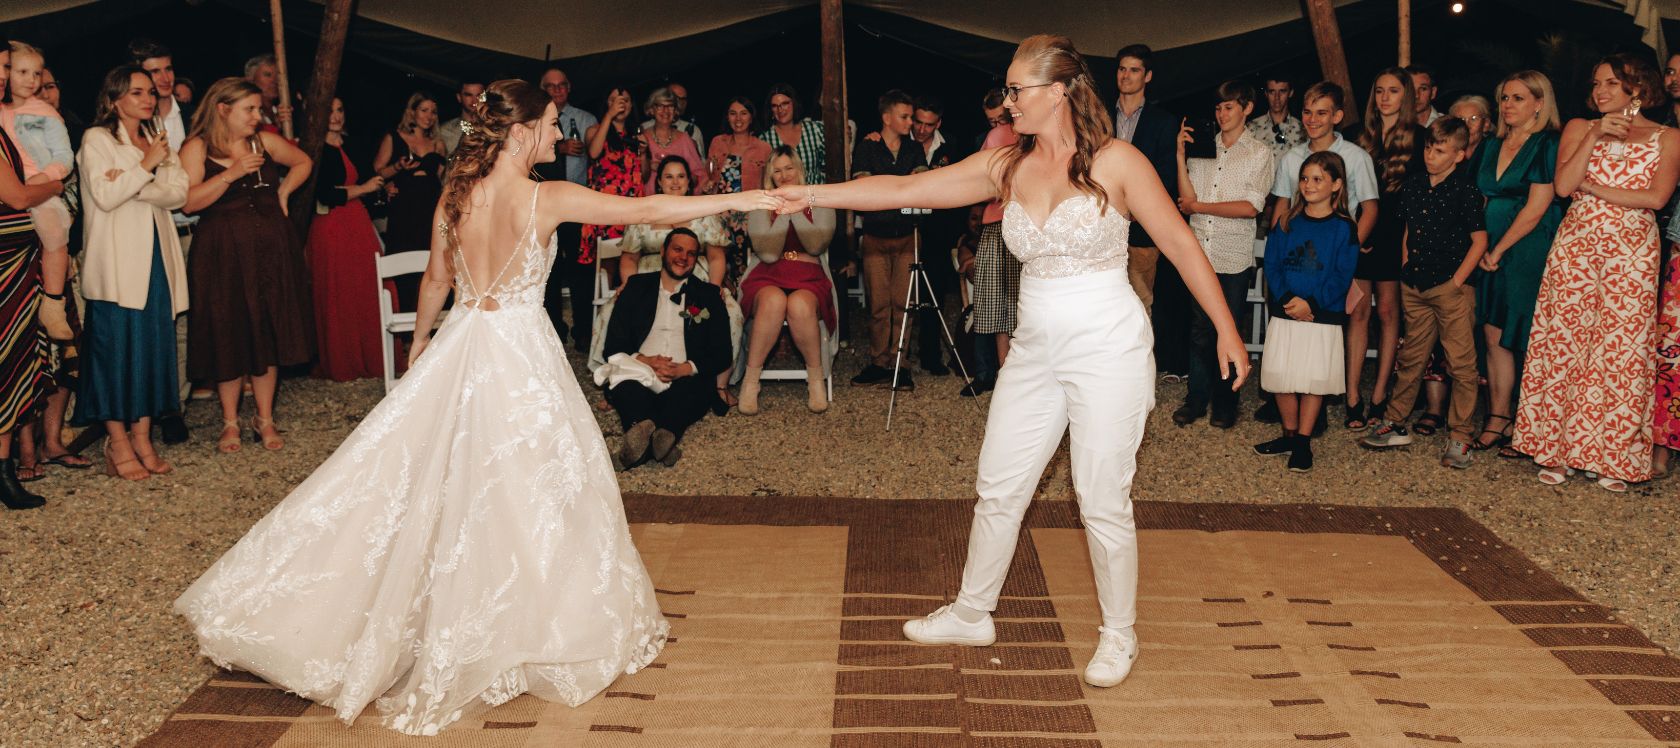 Two brides dance their first dance together as wedding guests watch on